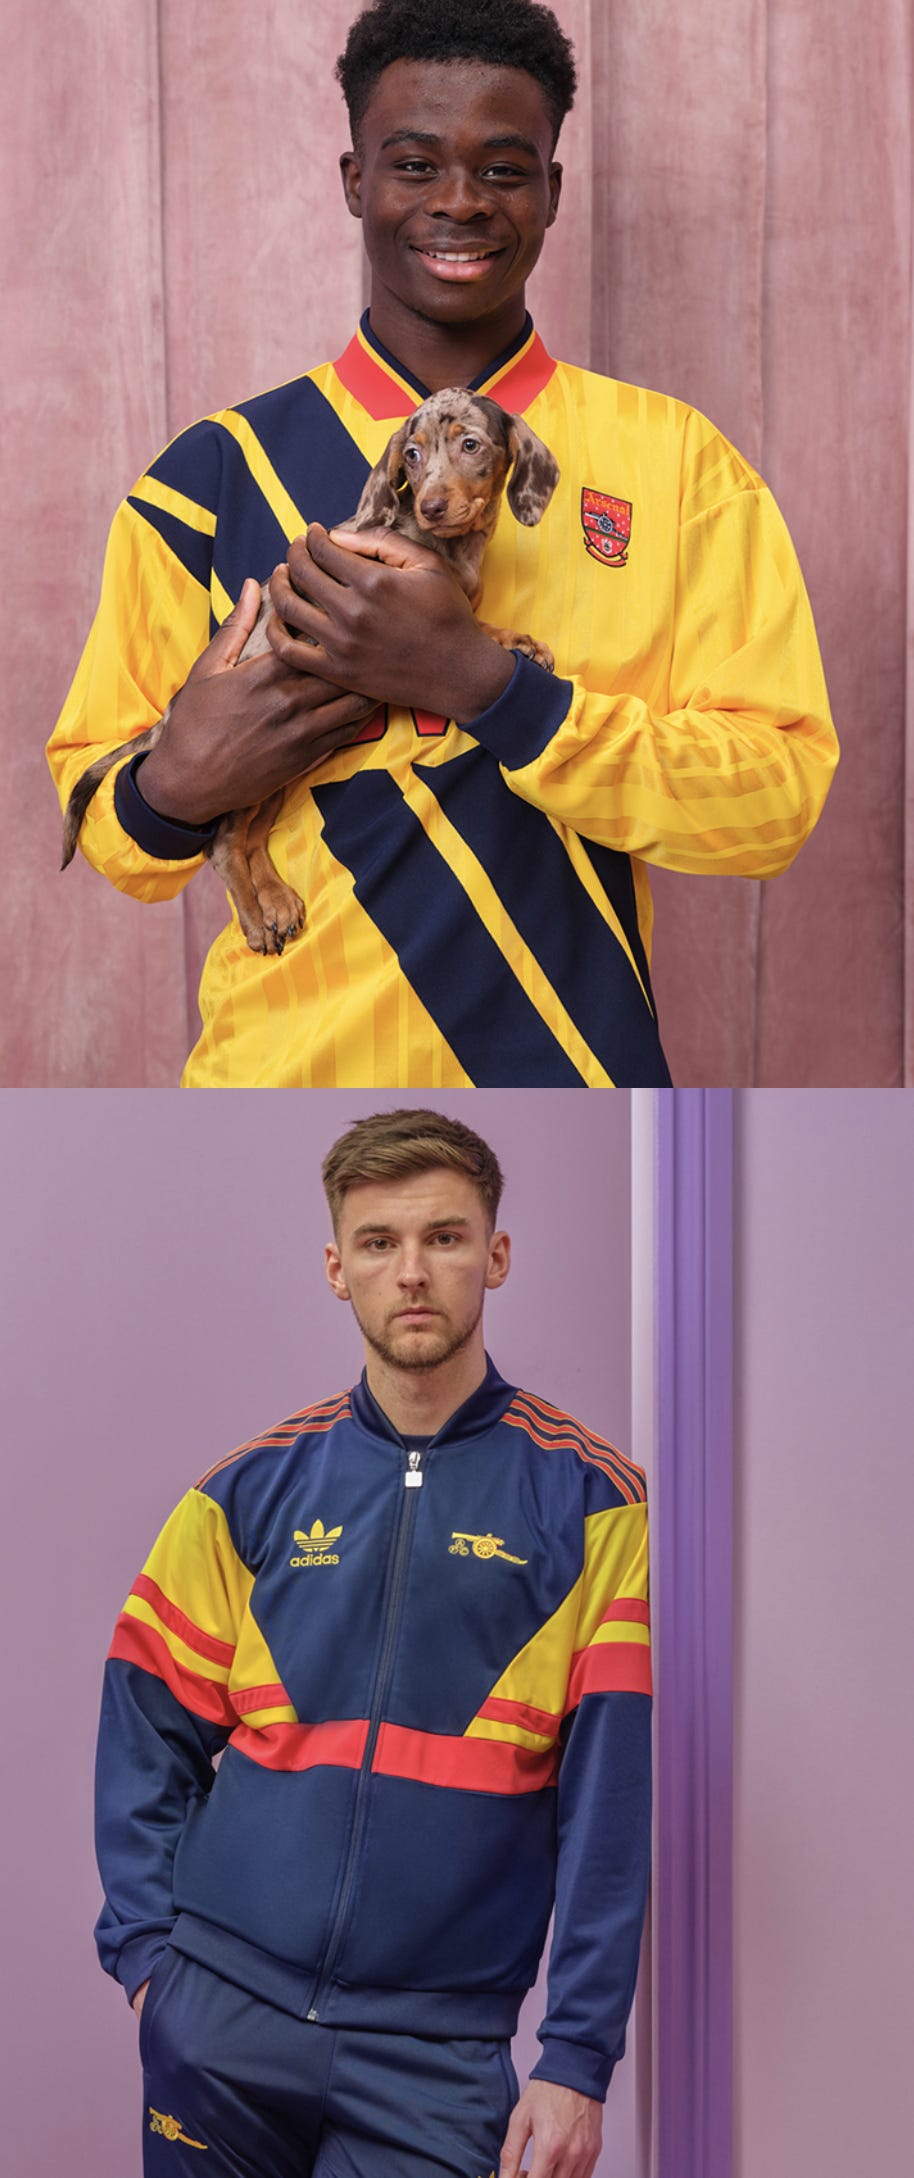 How adidas brought the classic Arsenal bruised banana kit back to life